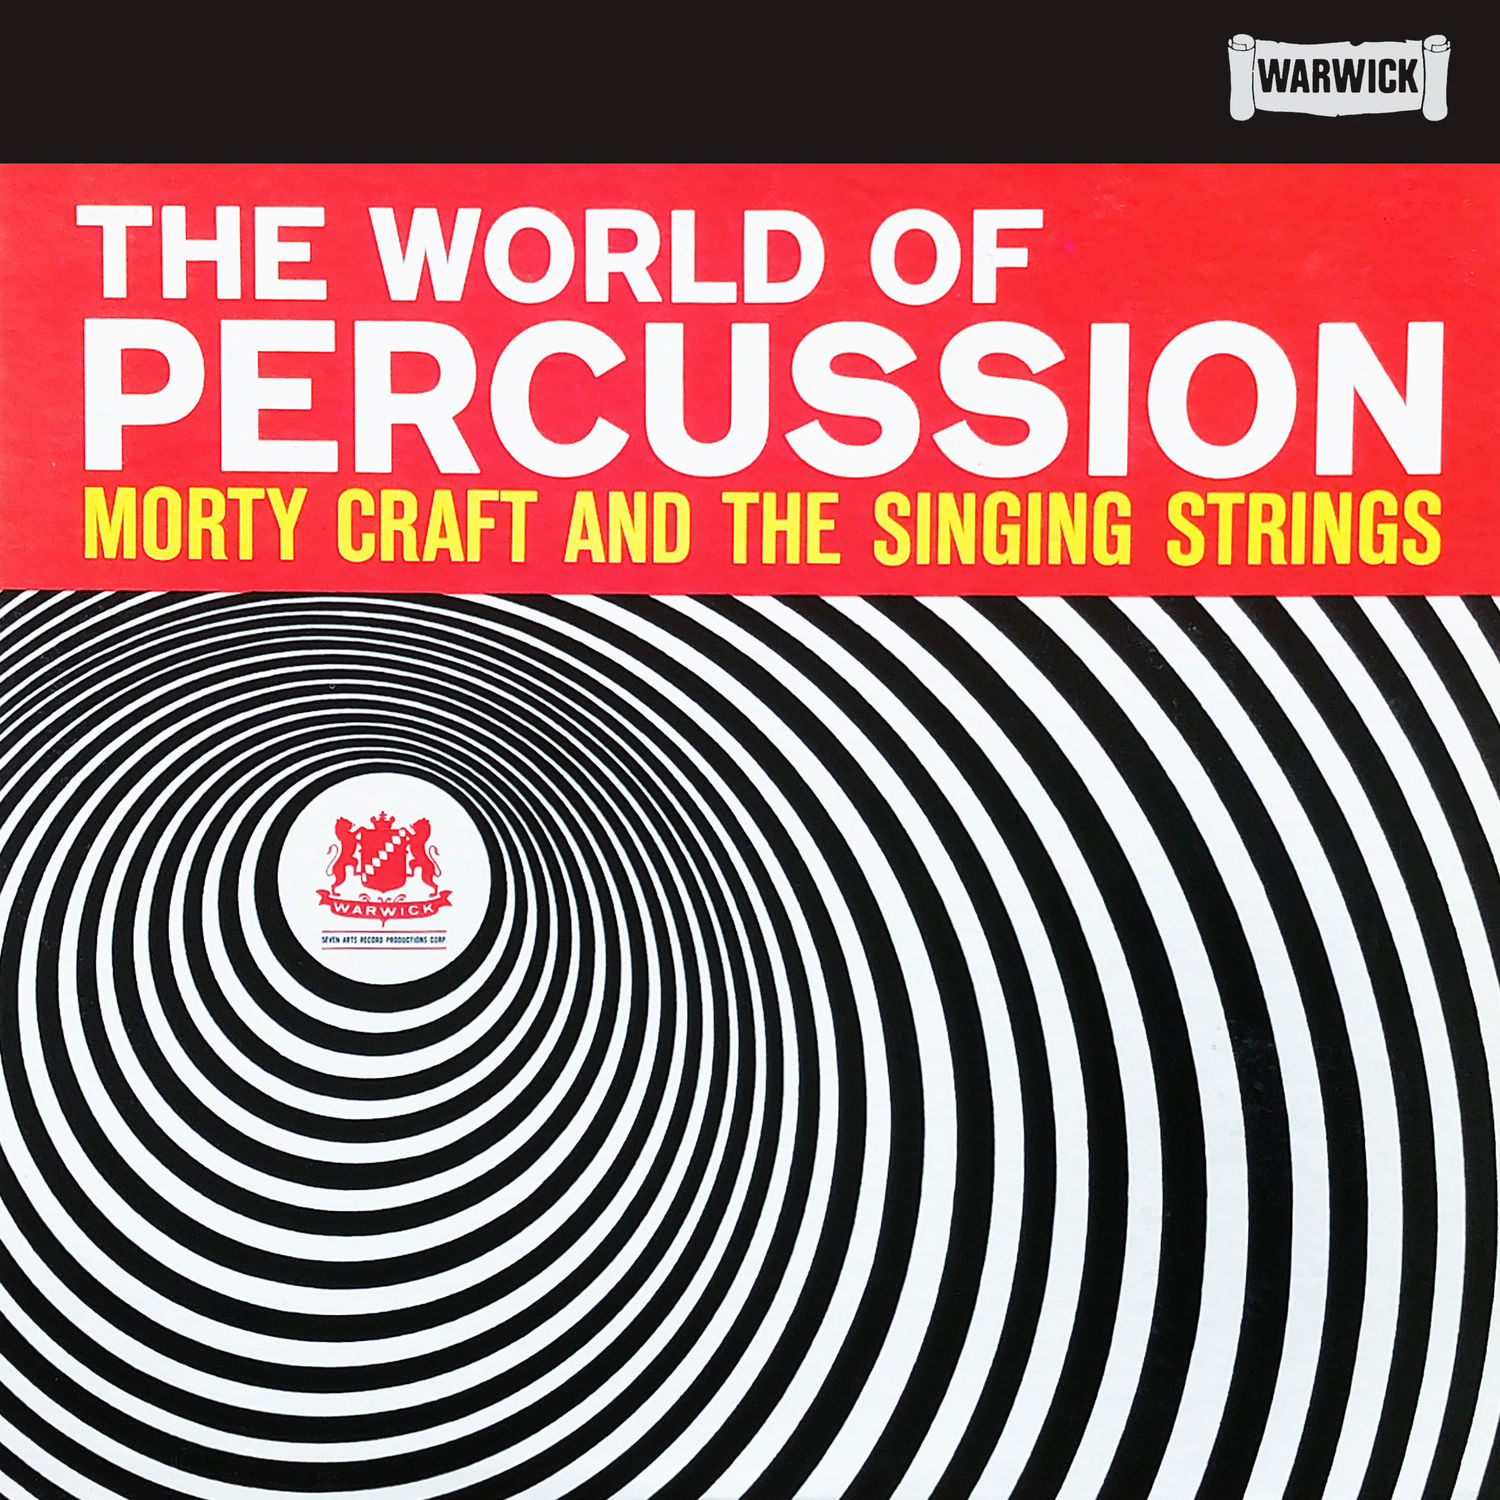 Morty Craft And The Singing Strings - The World of Percussion (1961/2021) [FLAC 24bit/96kHz]